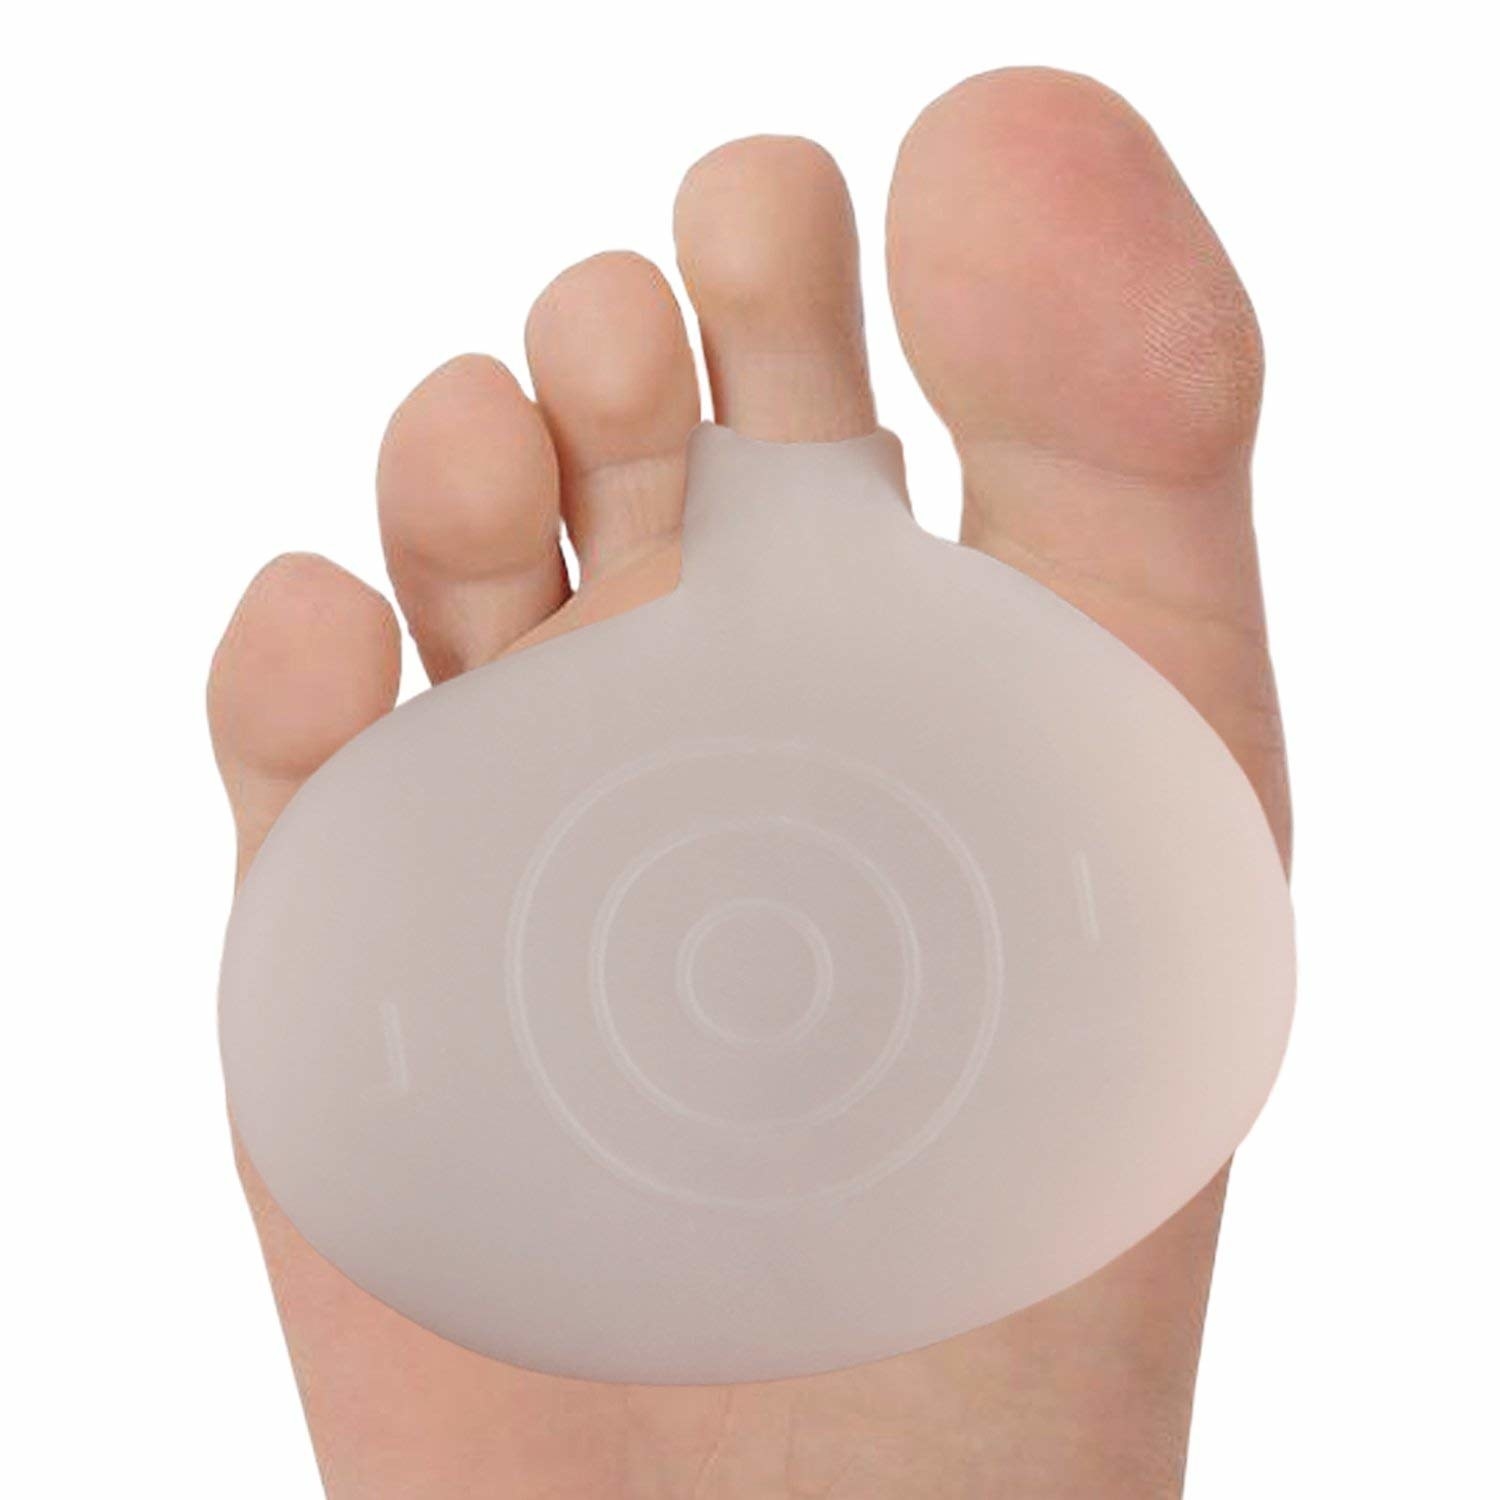 Clear cushion worn around second toe and covering the ball of the foot 